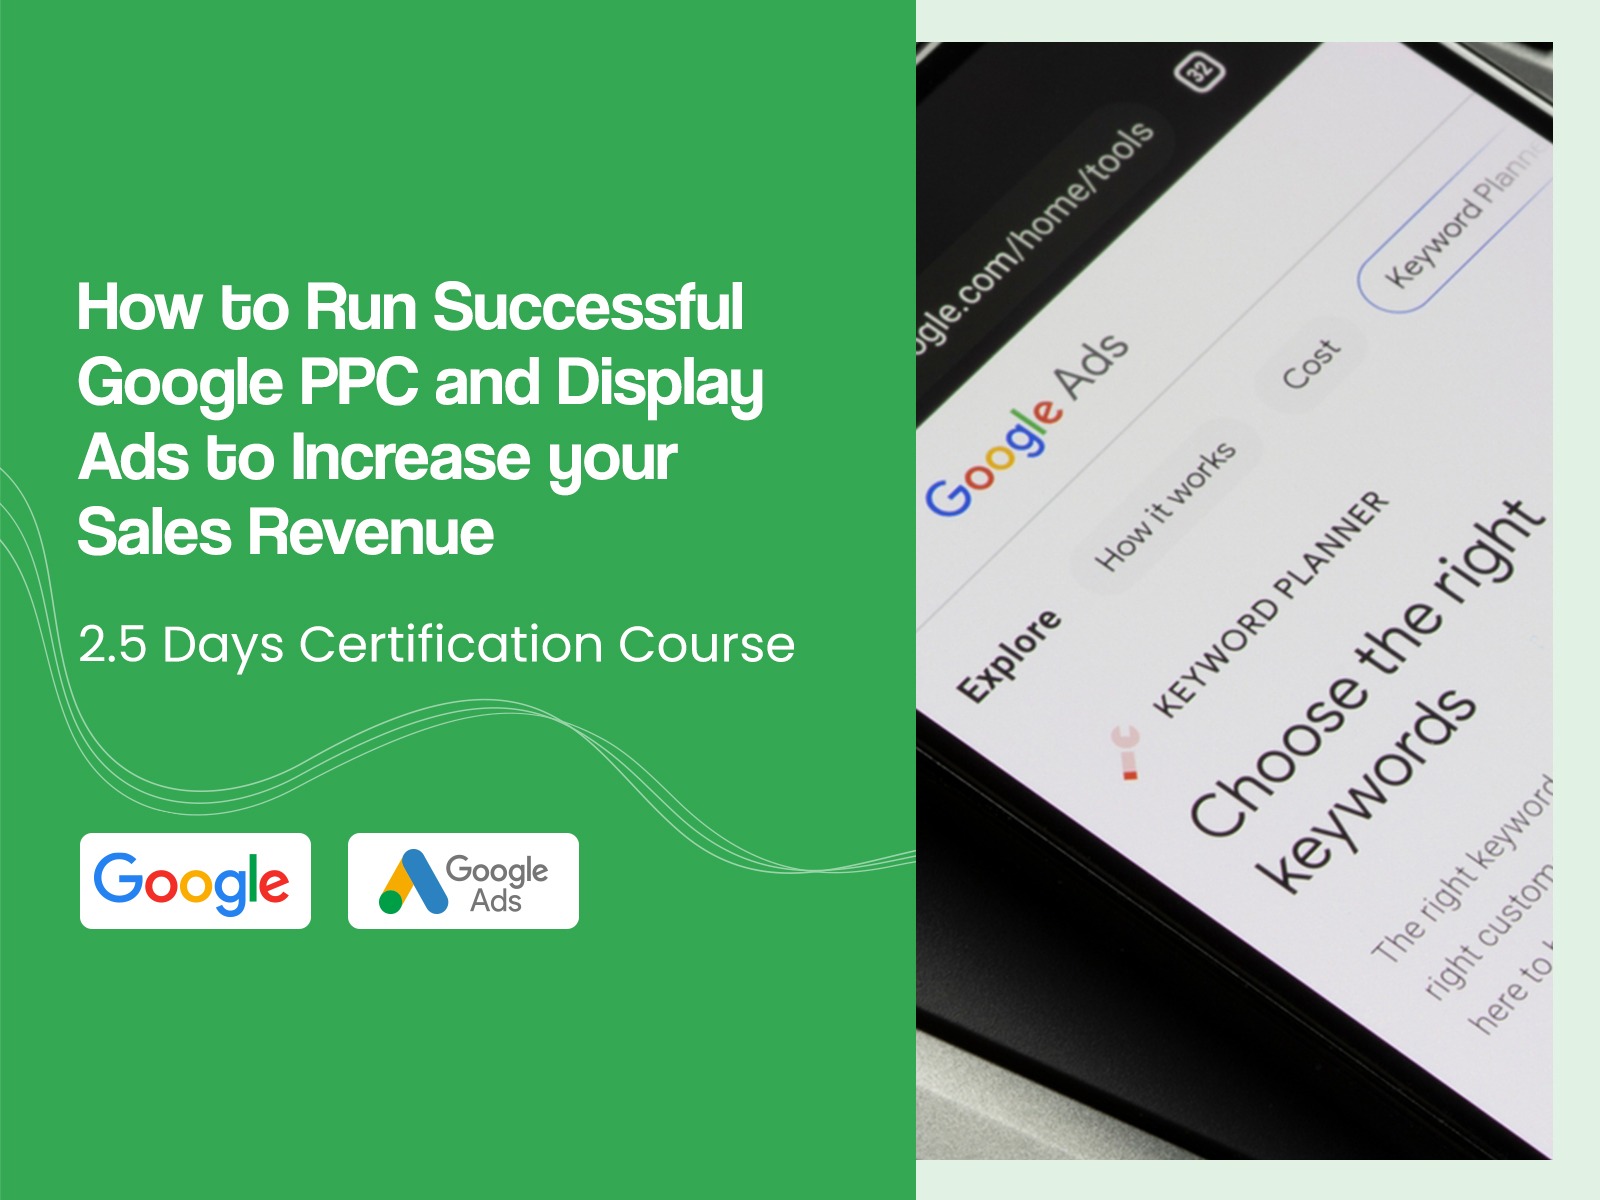 How to Run Successful Google PPC and Display Ads to Increase your Sales Revenue course in Singapore